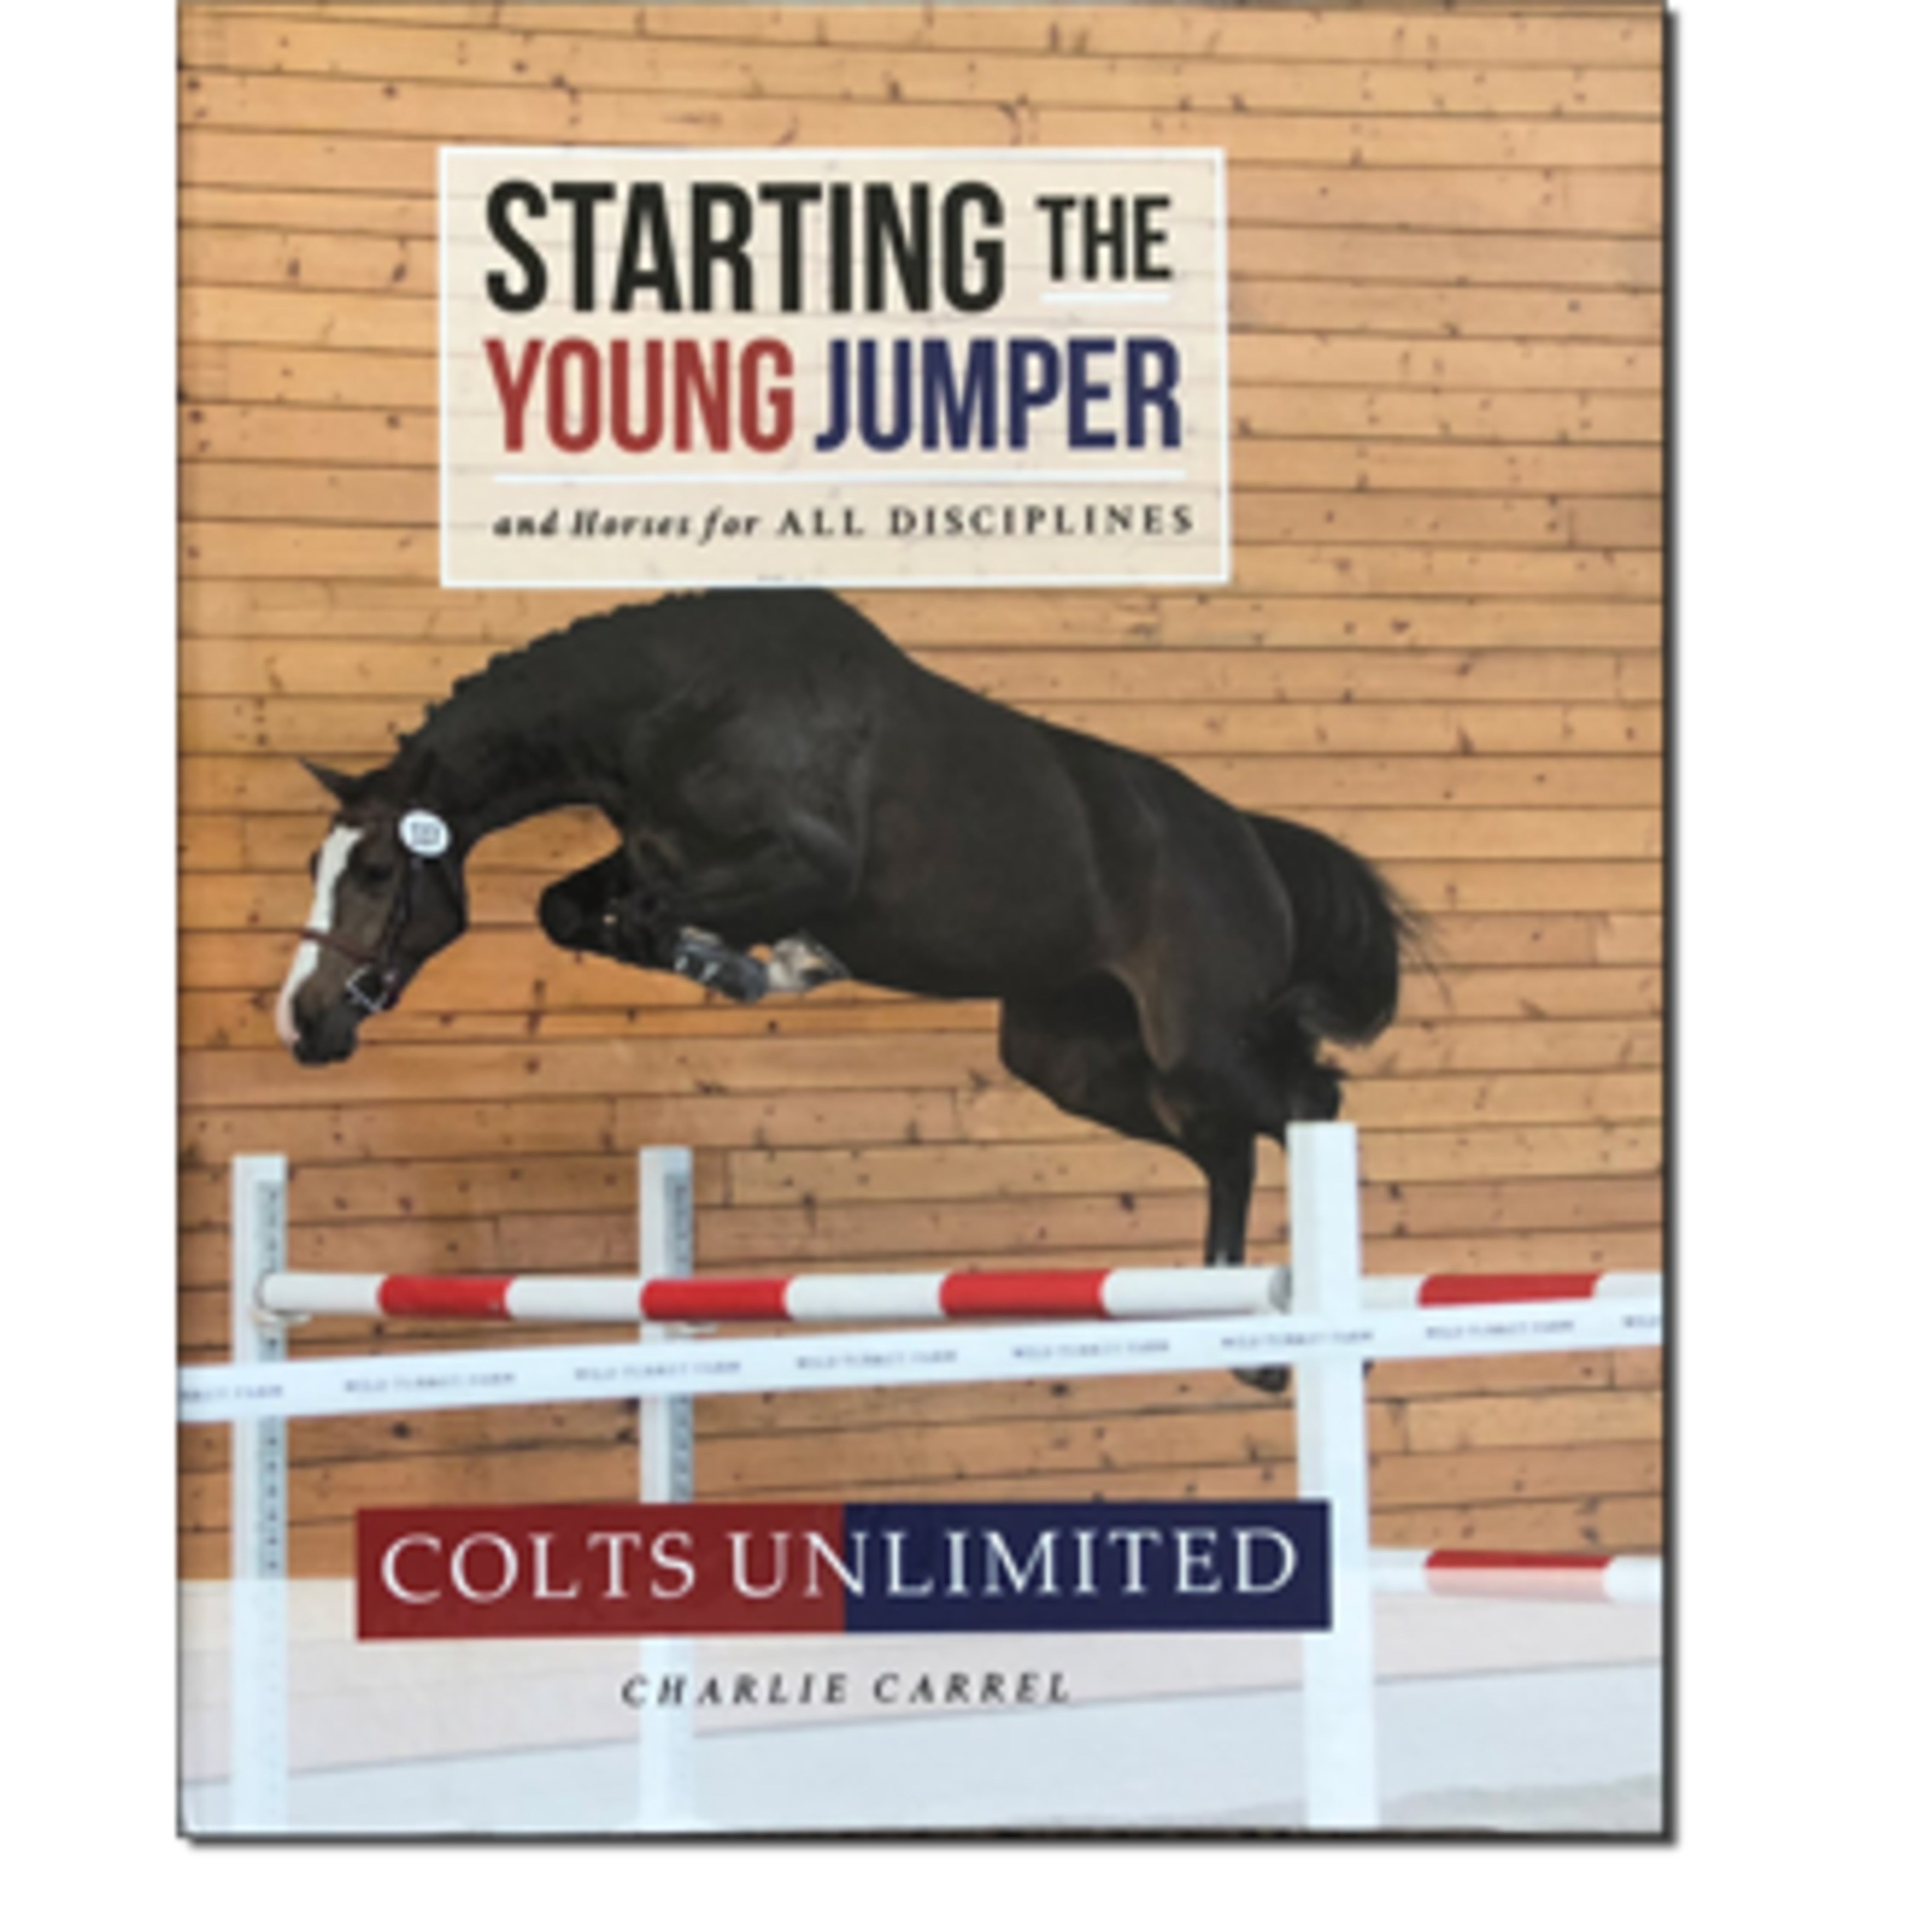 Starting the Young Jumper